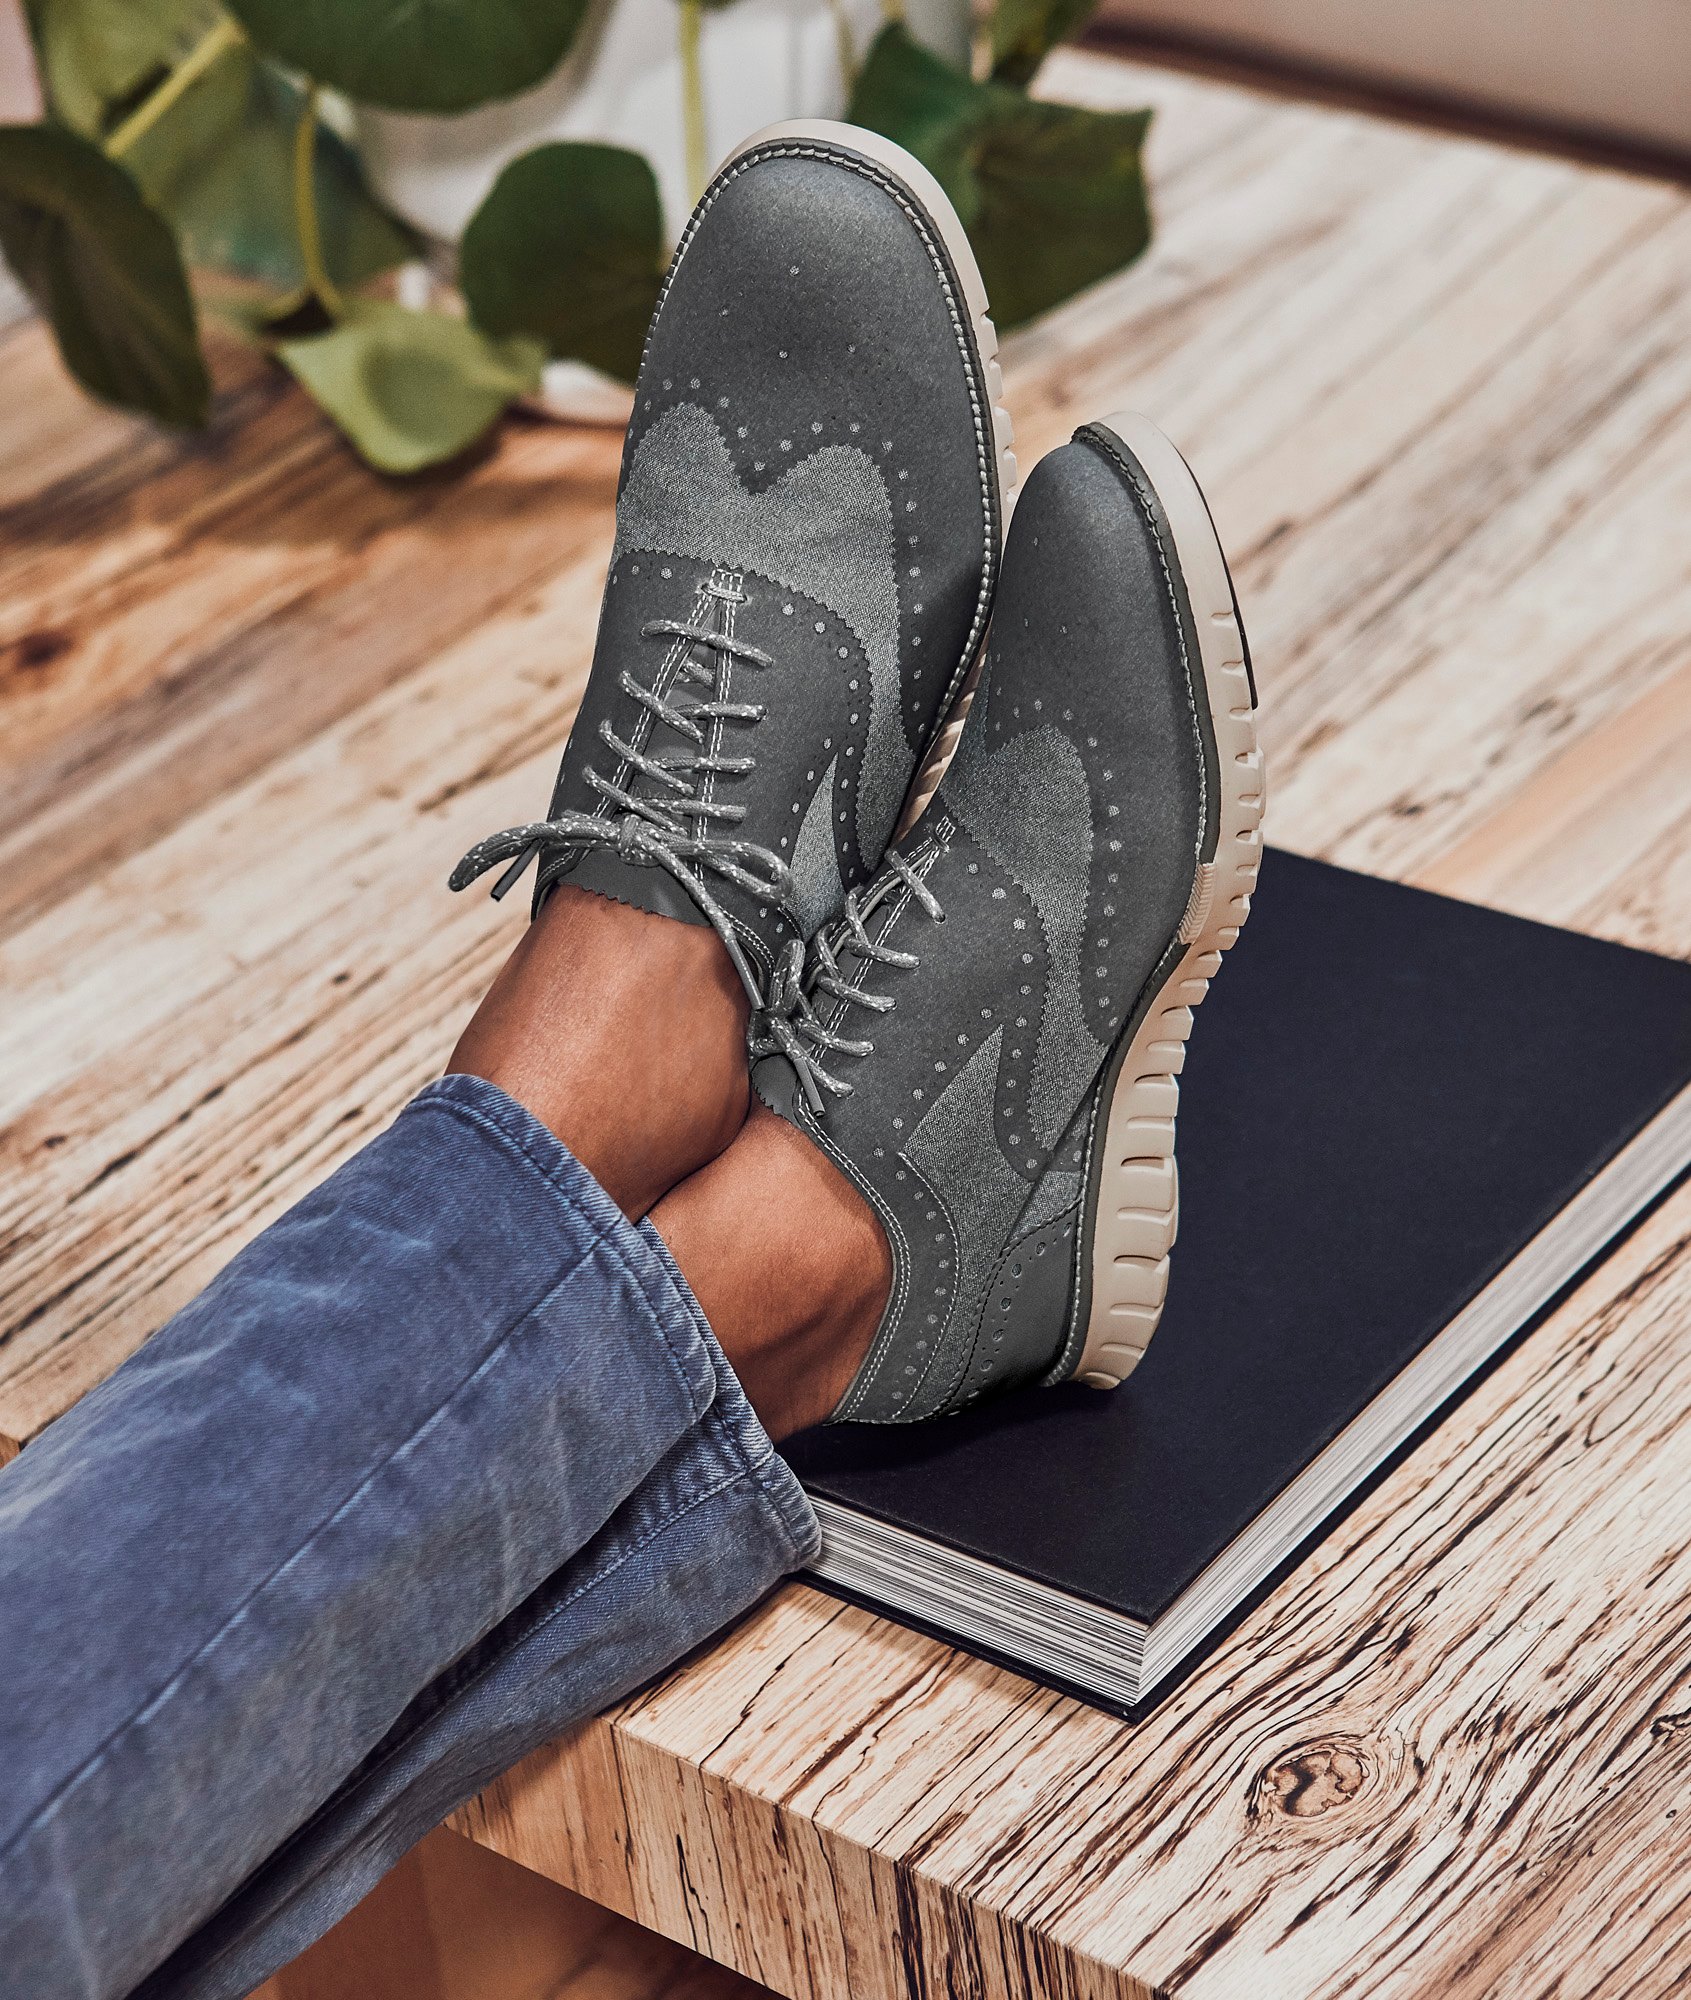 No stitches, no problem - and now 30% off. Discover the smooth, stitch-free ZERØGRAND Oxford for men during our Semi-Annual Event. 